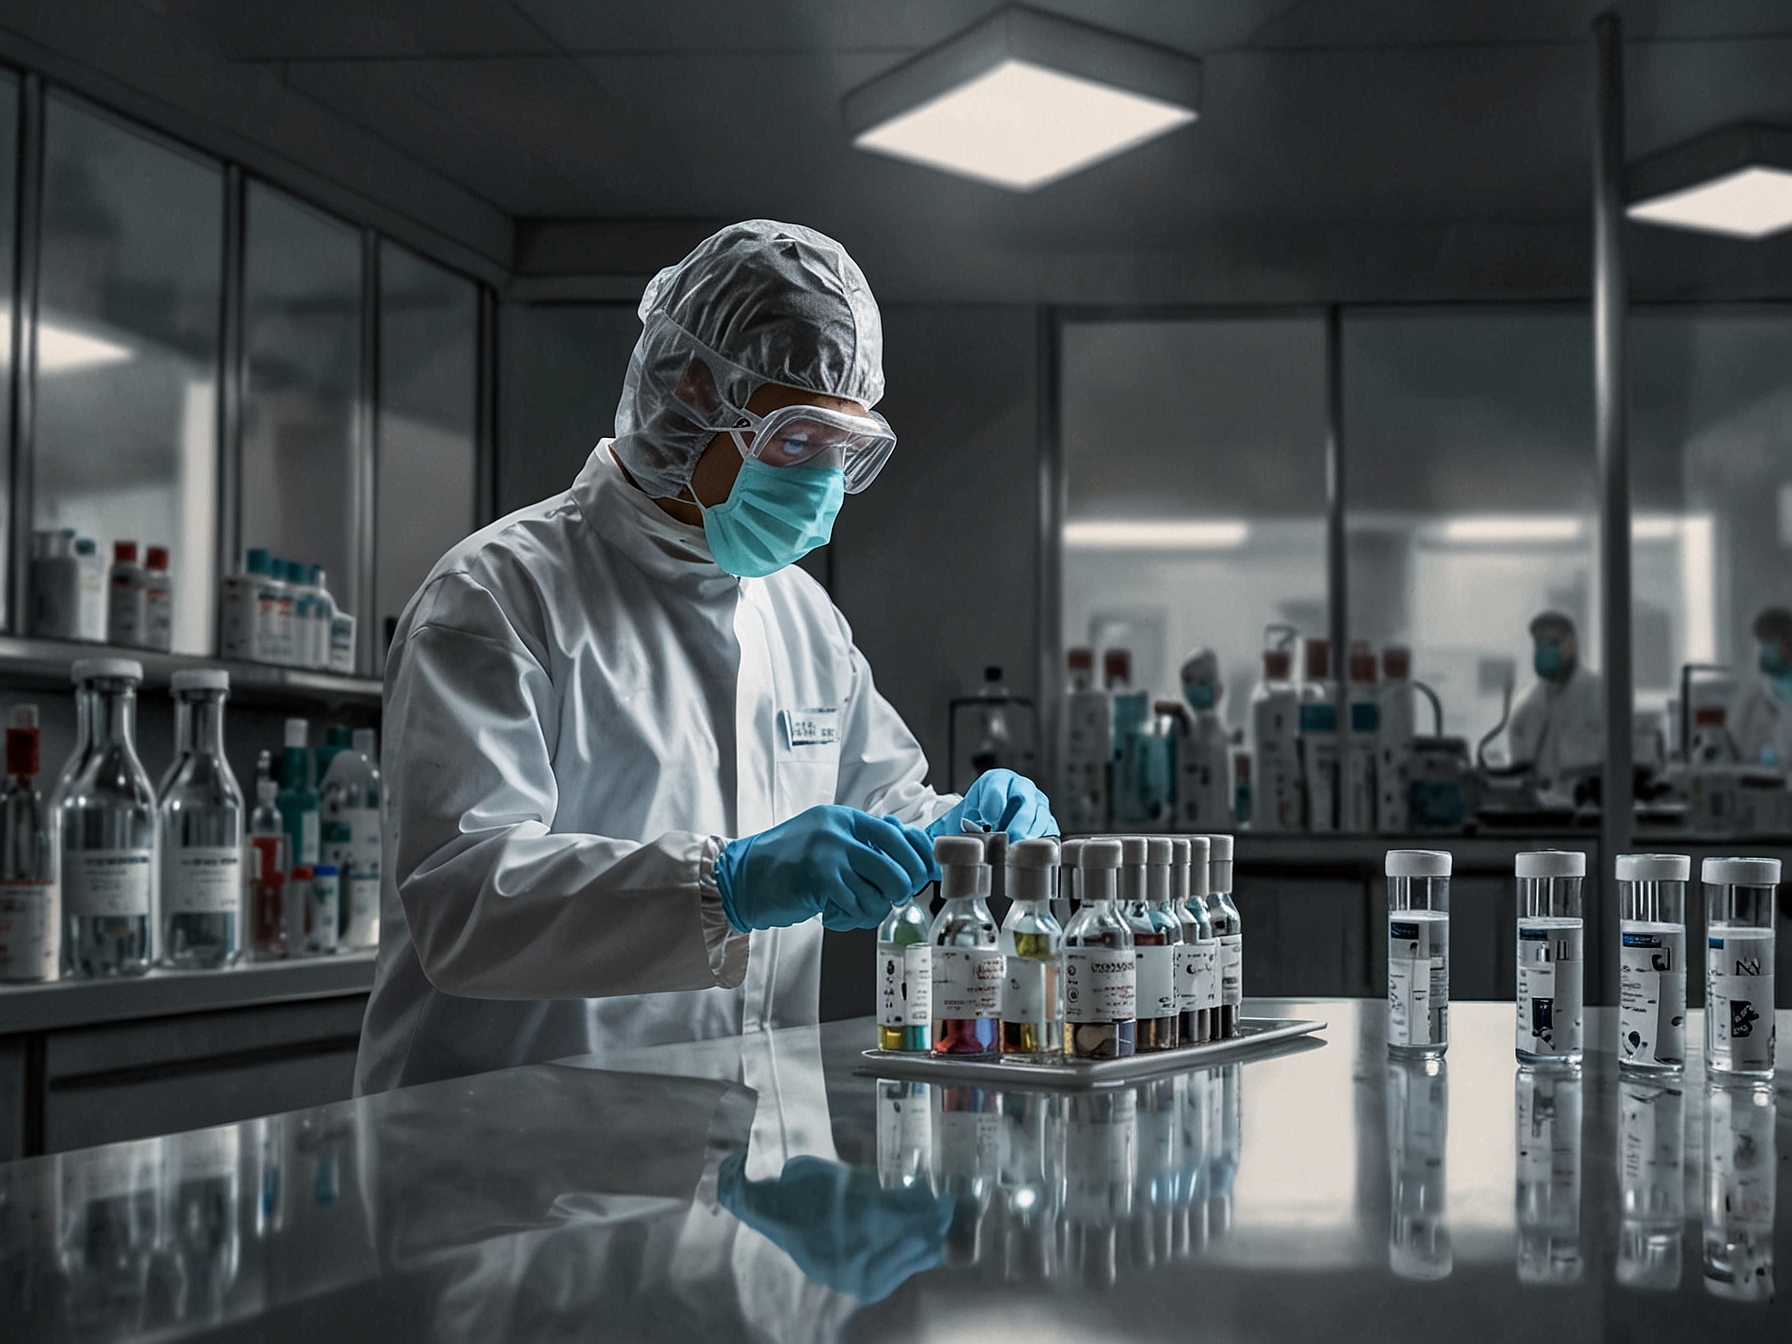 A laboratory technician in protective gear handles vials containing vaccines, representing Emergent BioSolutions' strategic efforts in preparing medical countermeasures for biological threats.